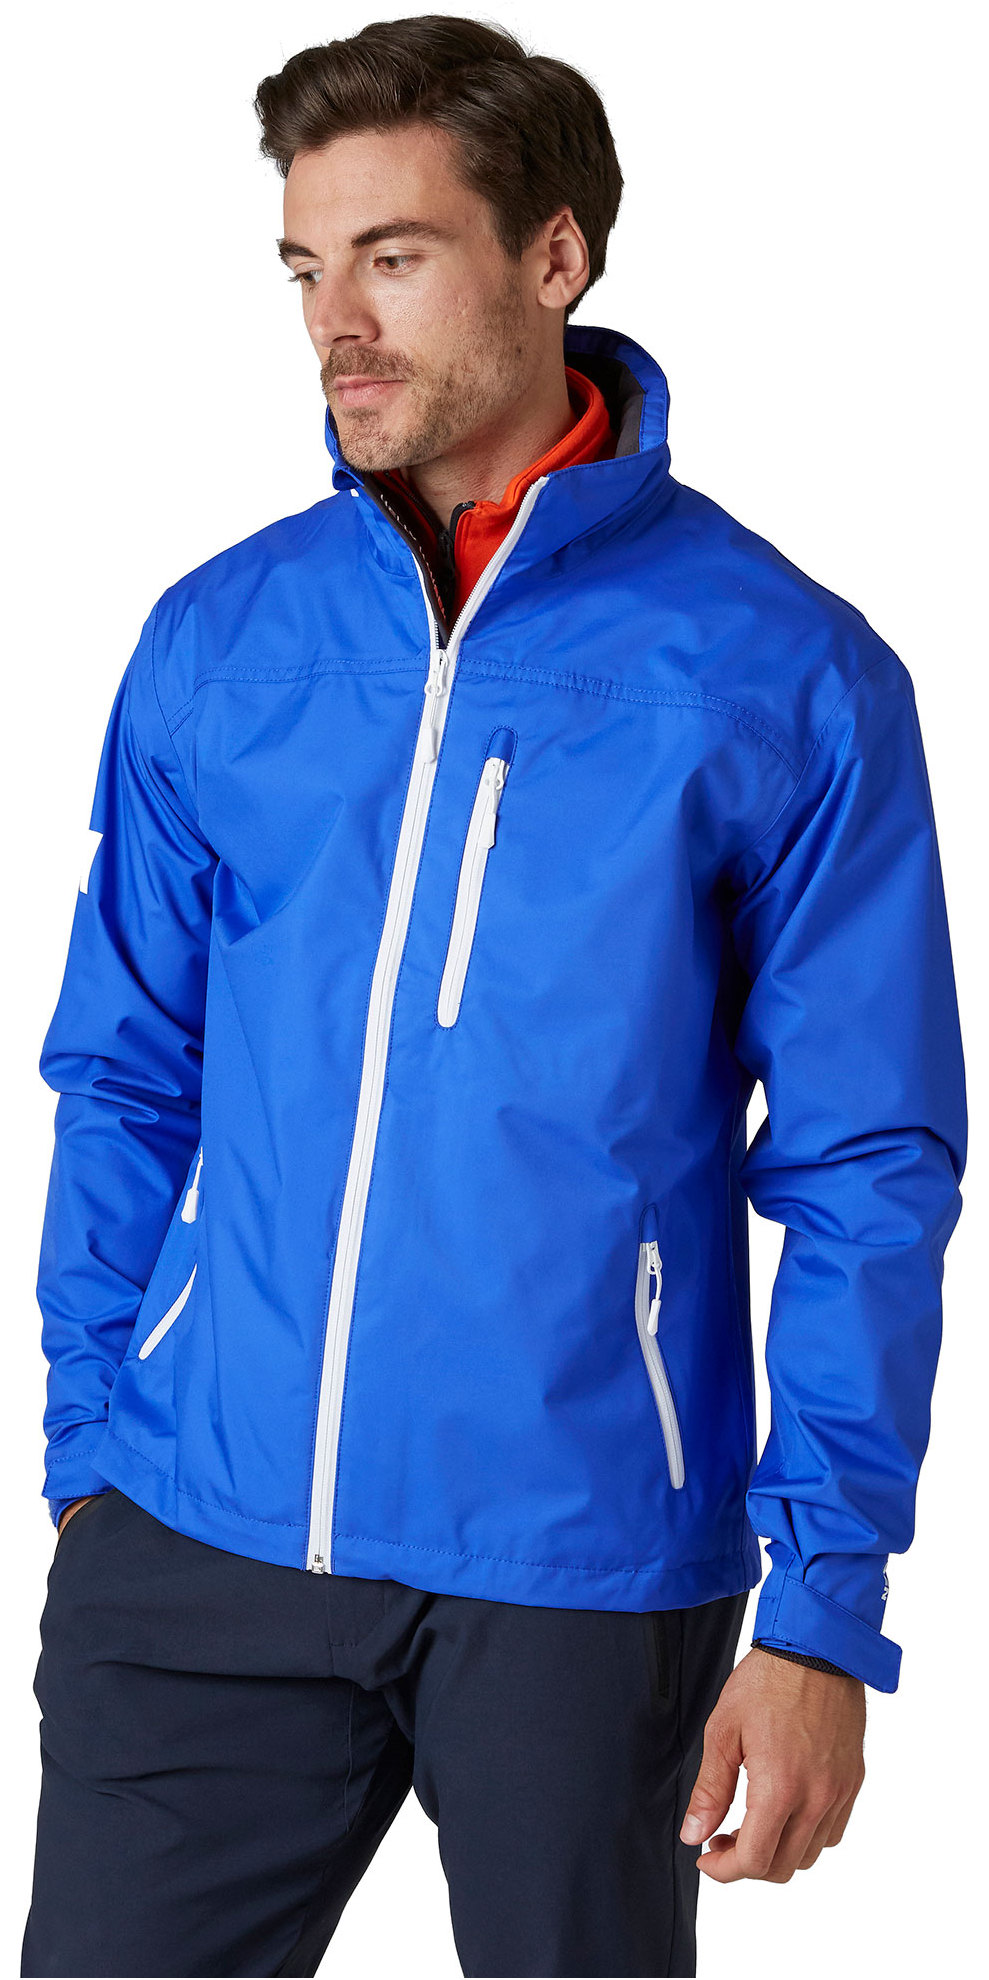 2021 Helly Hansen Crew Jacket 30263 - Royal Blue - Sailing - Sailing - Yacht | Watersports Outlet